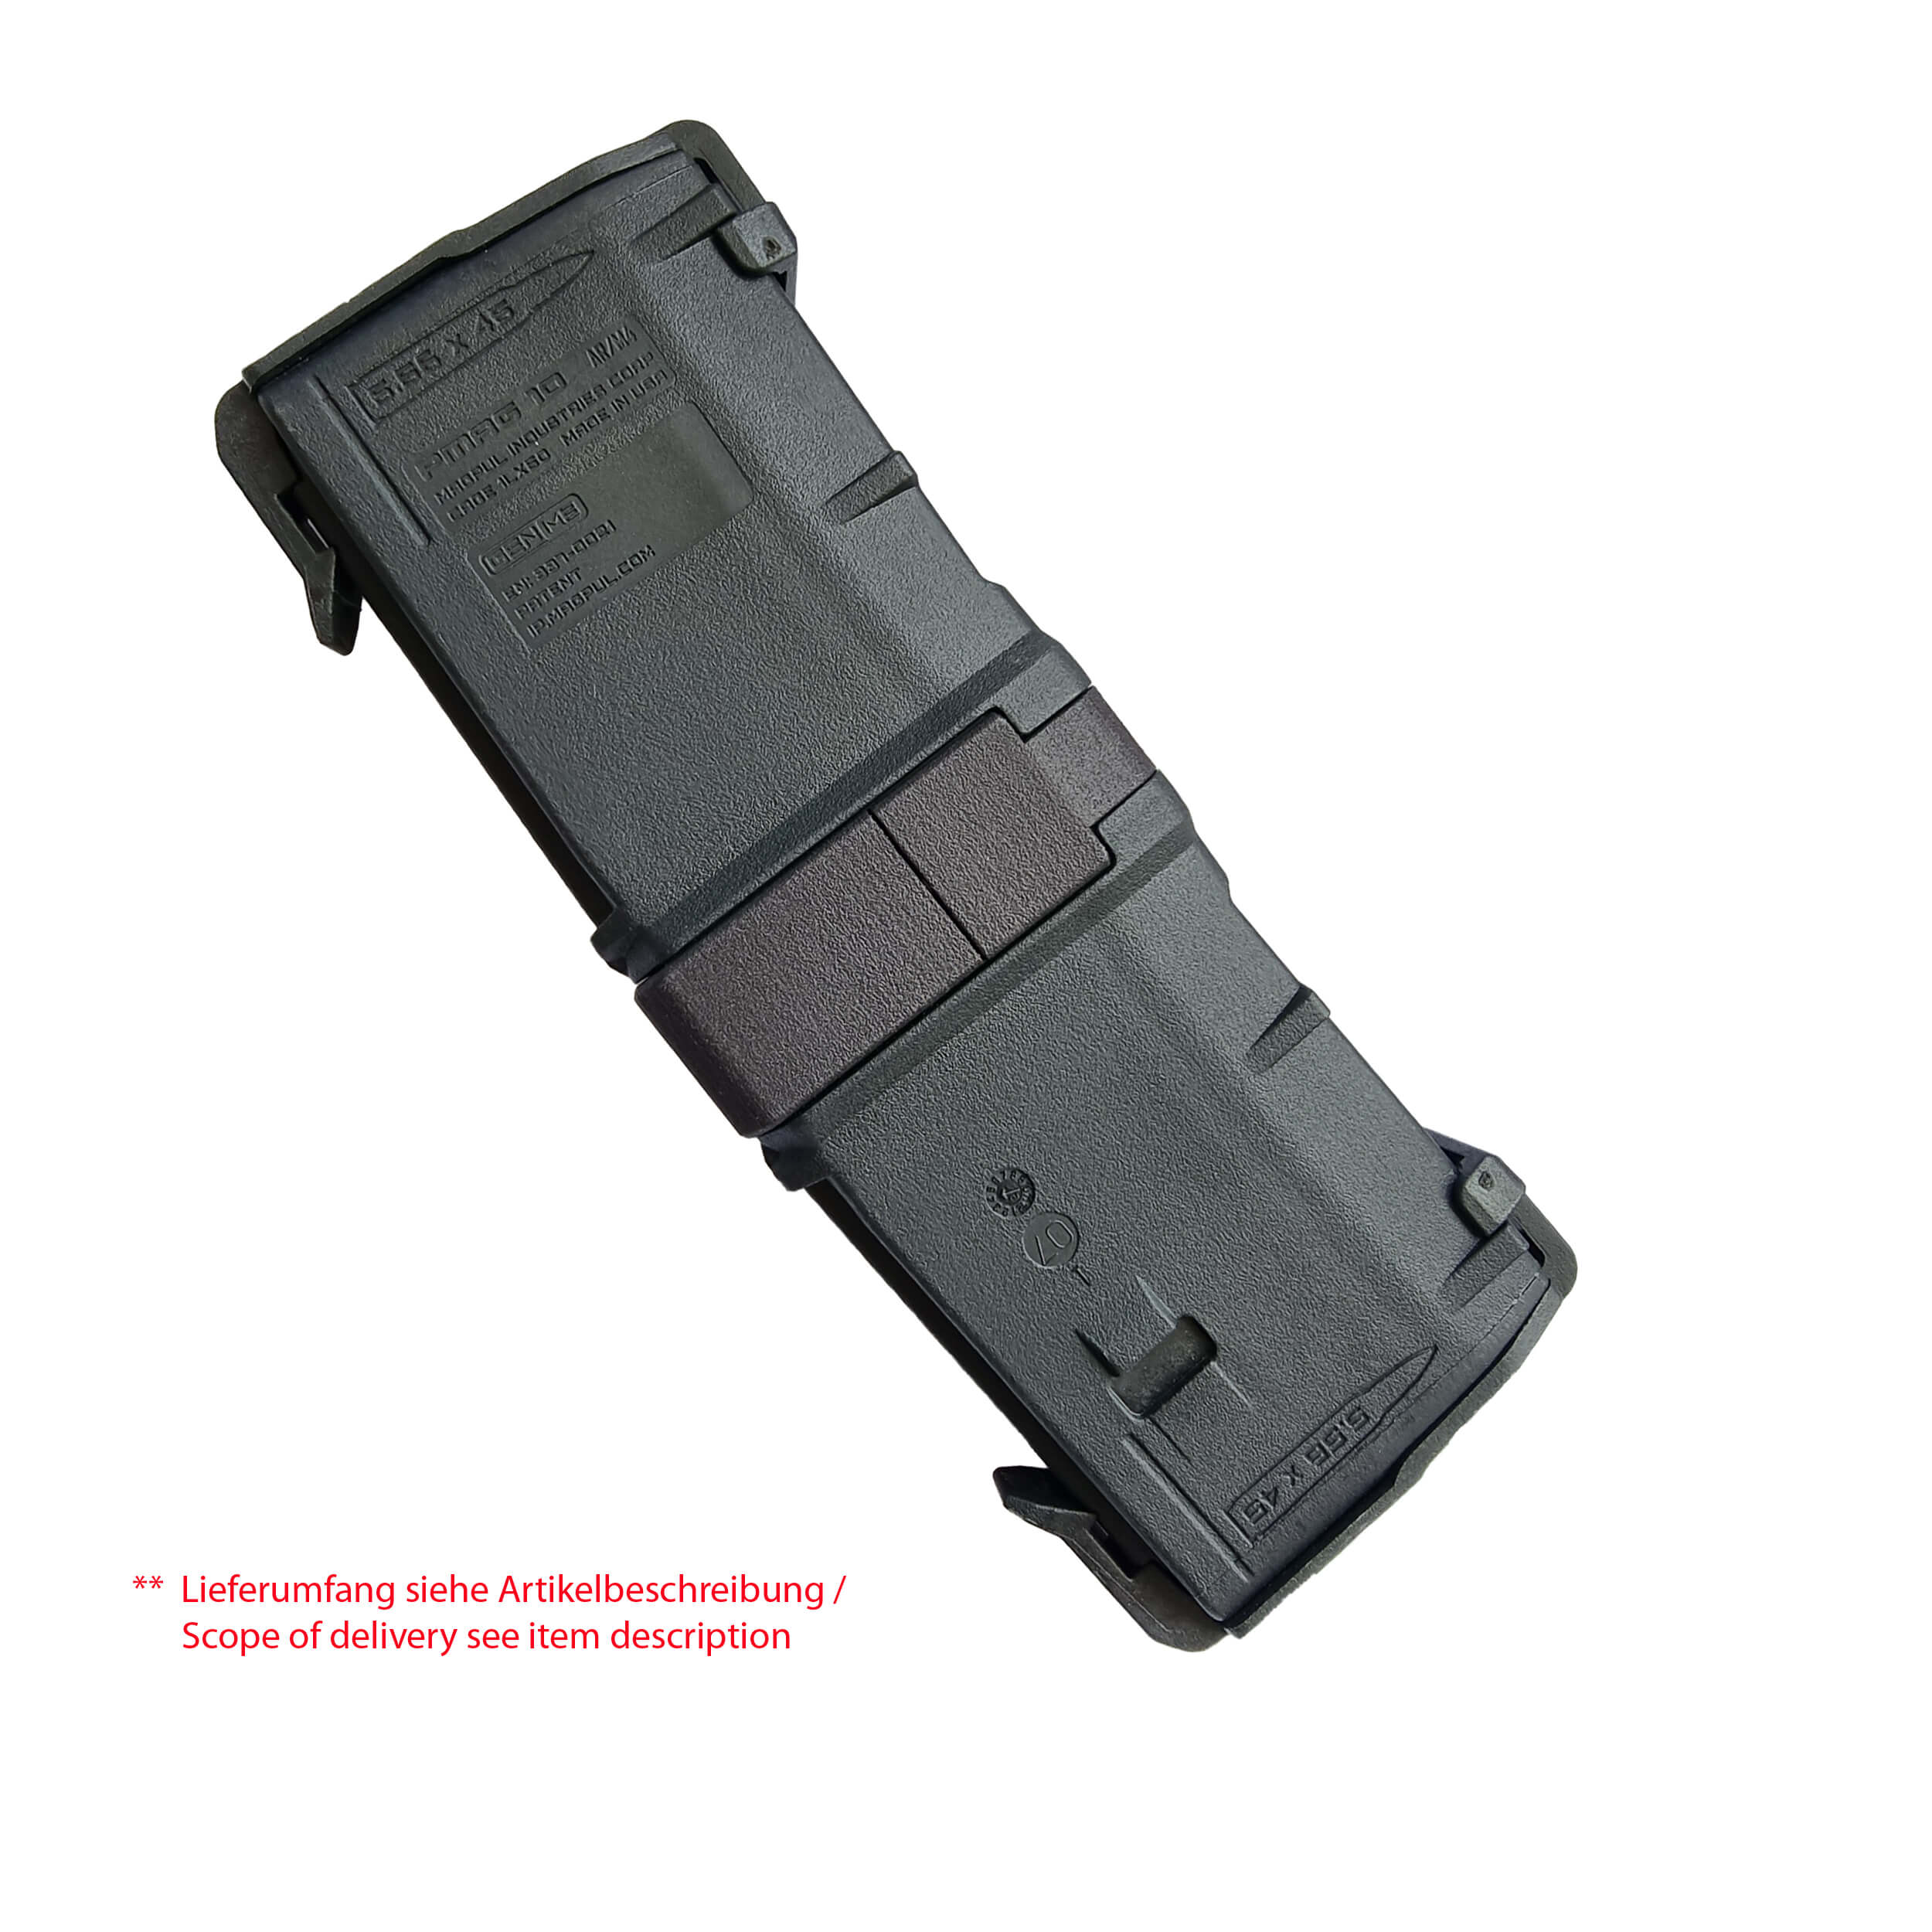 ISSProtectiontrade Magazine Coupler for MAGPUL PMAG AR-15 Gen3 Magazines